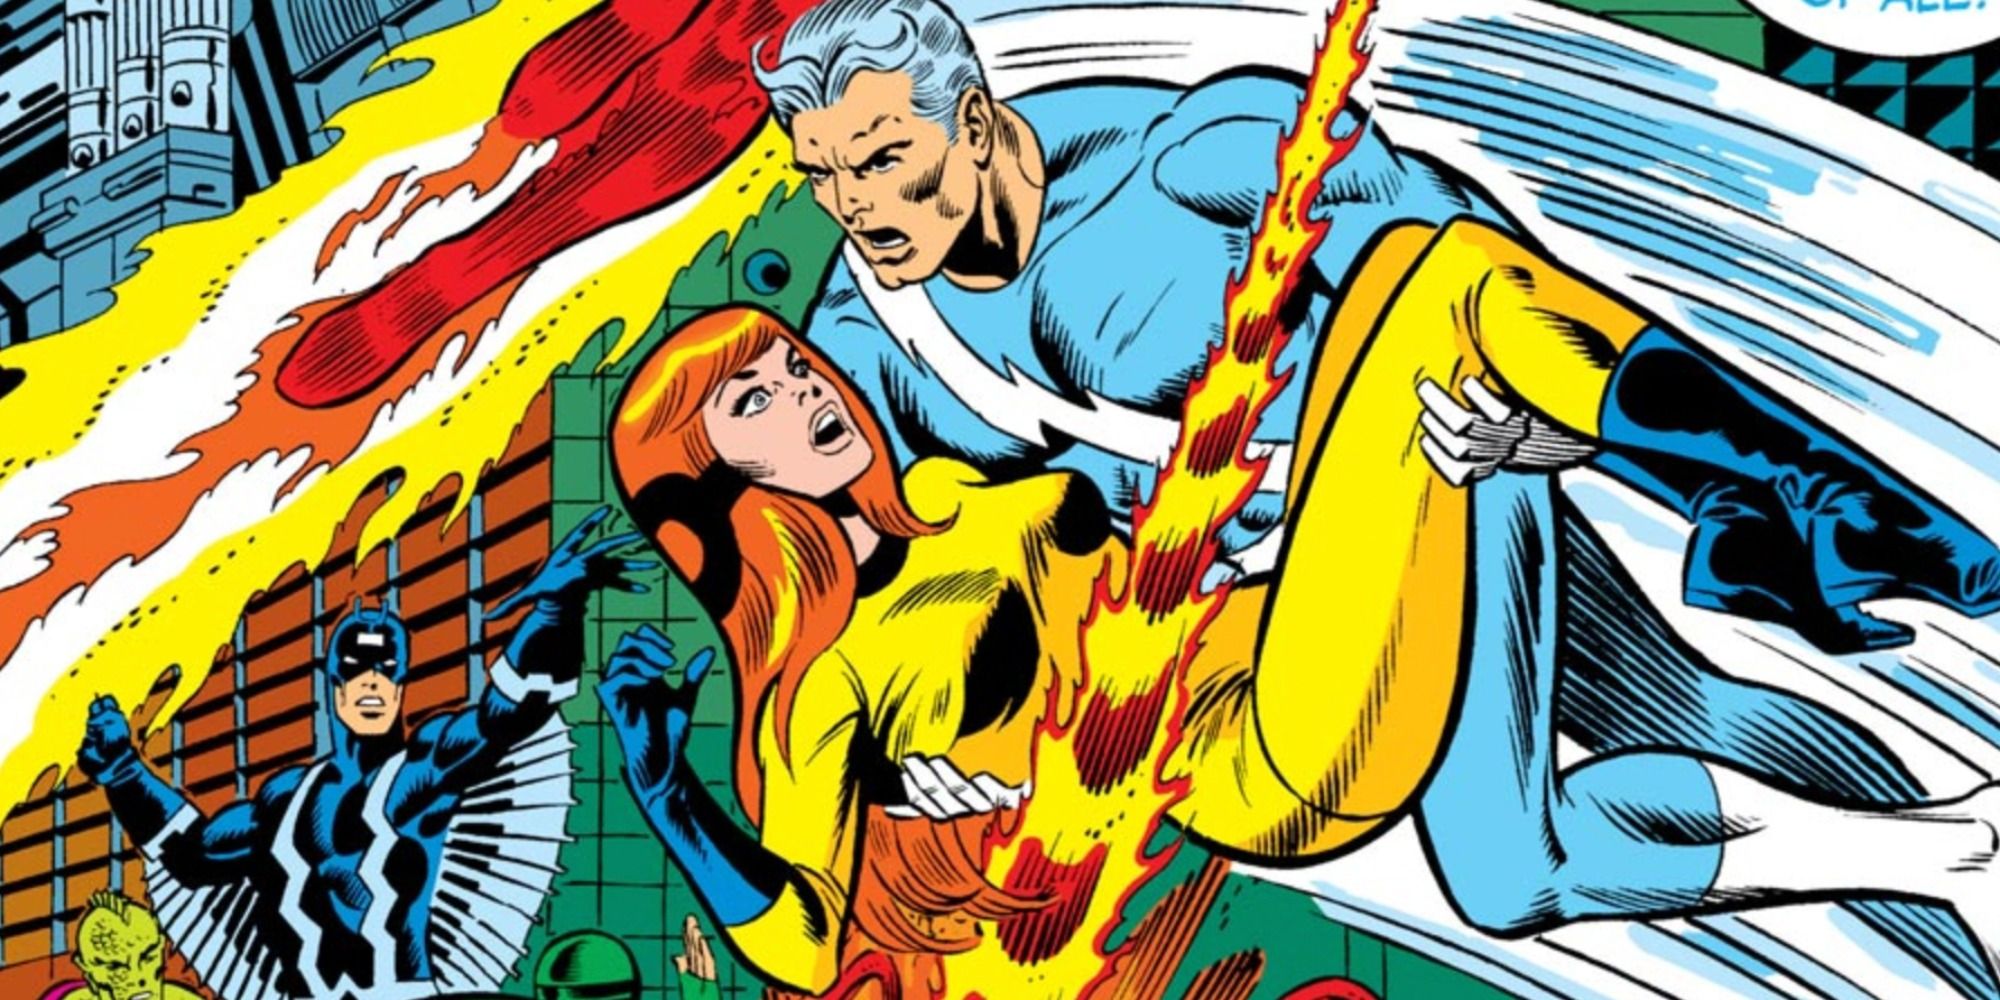 Black Bolt looks on as Quicksilver captures Crystal in Marvel Comics.